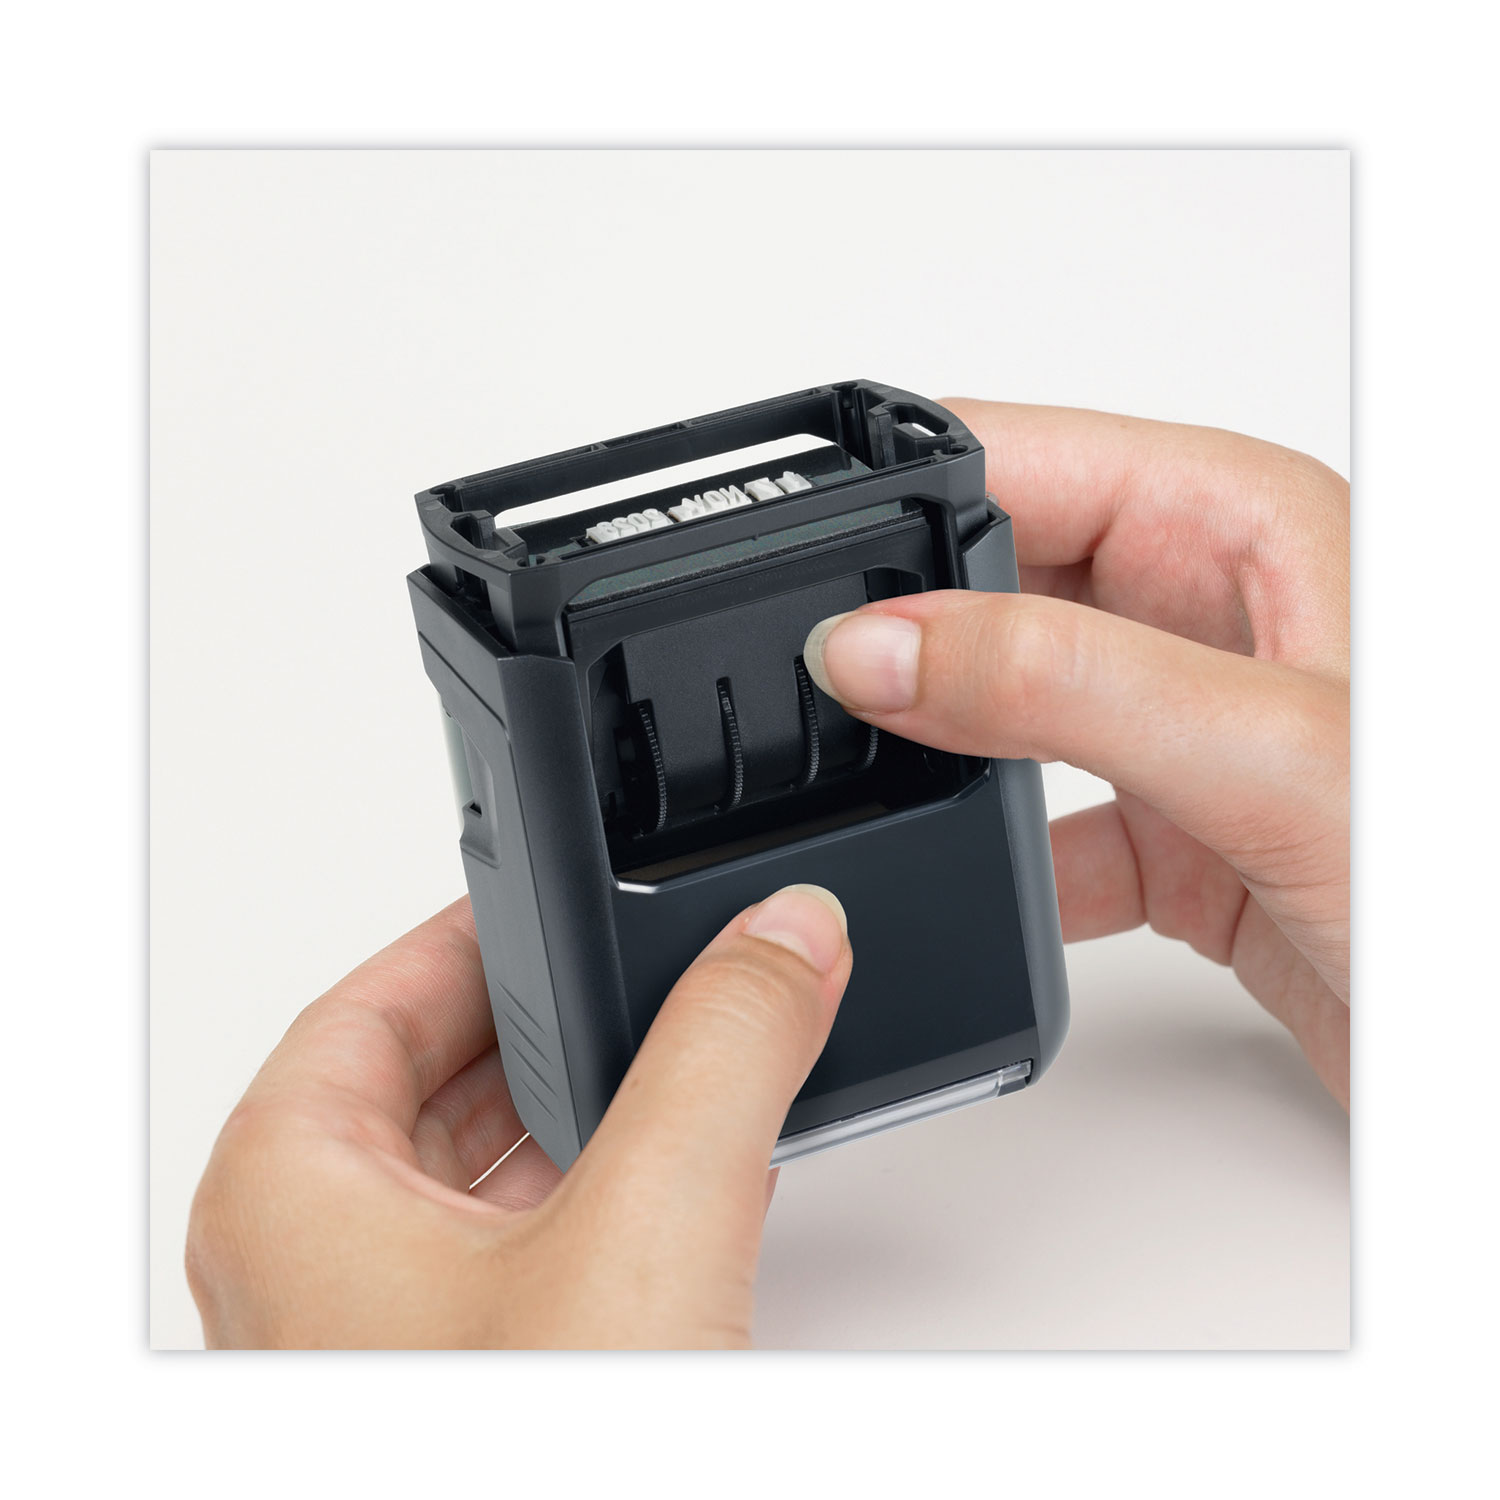 Trodat Economy 5-in-1 Micro Date Stamp, Self-Inking, 3/4 x 1, Blue/Red